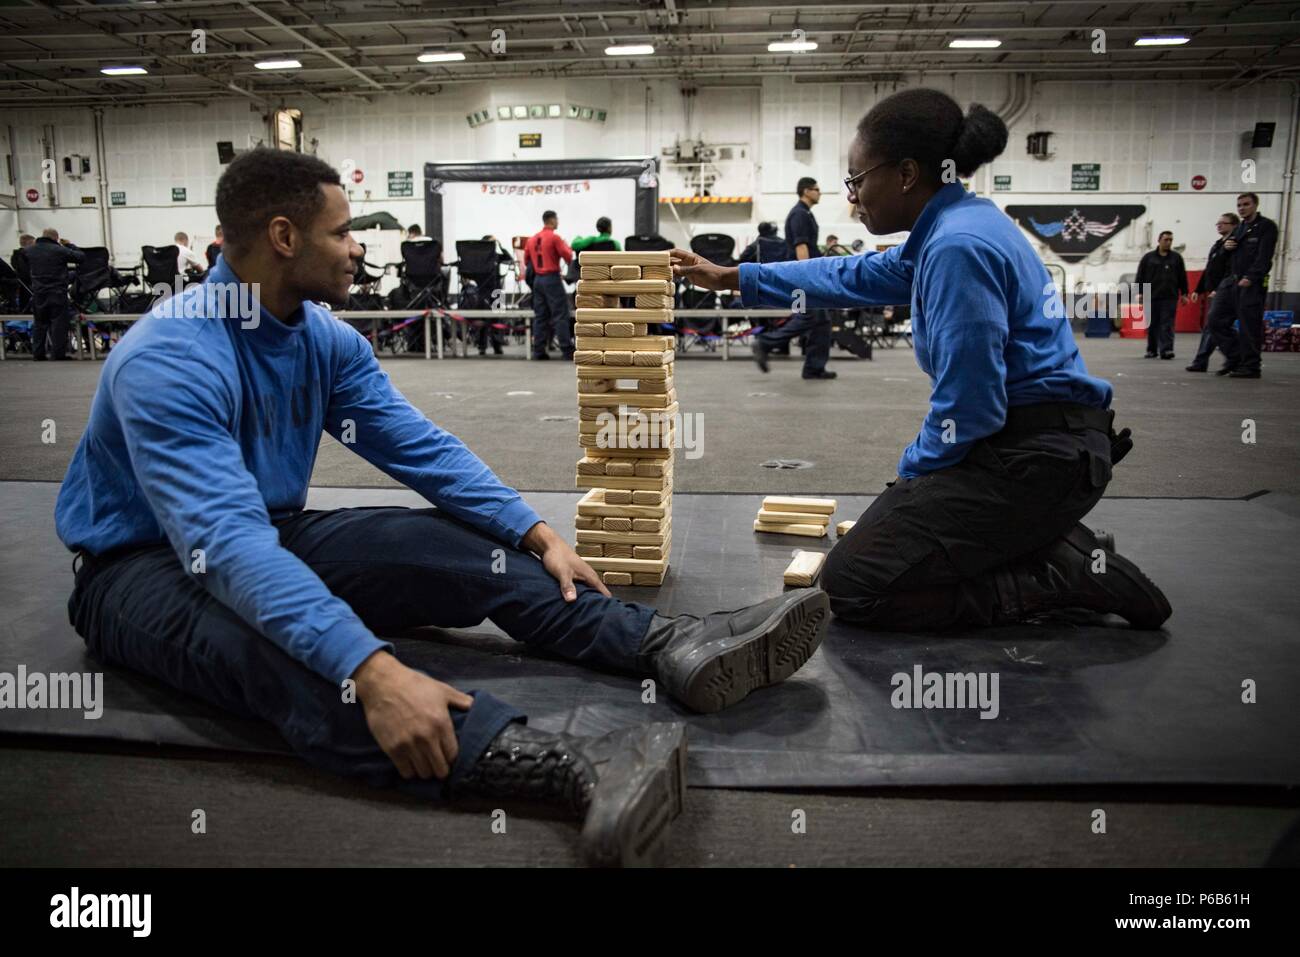 170205-N-IE397-016 ATLANTIC OCEAN (Feb. 5, 2017) Airman Michael Hudtins, left, and Aviation Boatswain's Mate (Handling) Airman Shanterica Green, play Jenga in the hangar bay of the aircraft carrier USS Dwight D. Eisenhower (CVN 69) during Super Bowl festivities provided by the ship's Morale, Welfare and Recreation department. Dwight D. Eisenhower is conducting aircraft carrier qualifications during the sustainment phase of the Optimized Fleet Response Plan. (U.S. Navy photo by Mass Communication Specialist 3rd Class Christopher A. Michaels/Released) Stock Photo